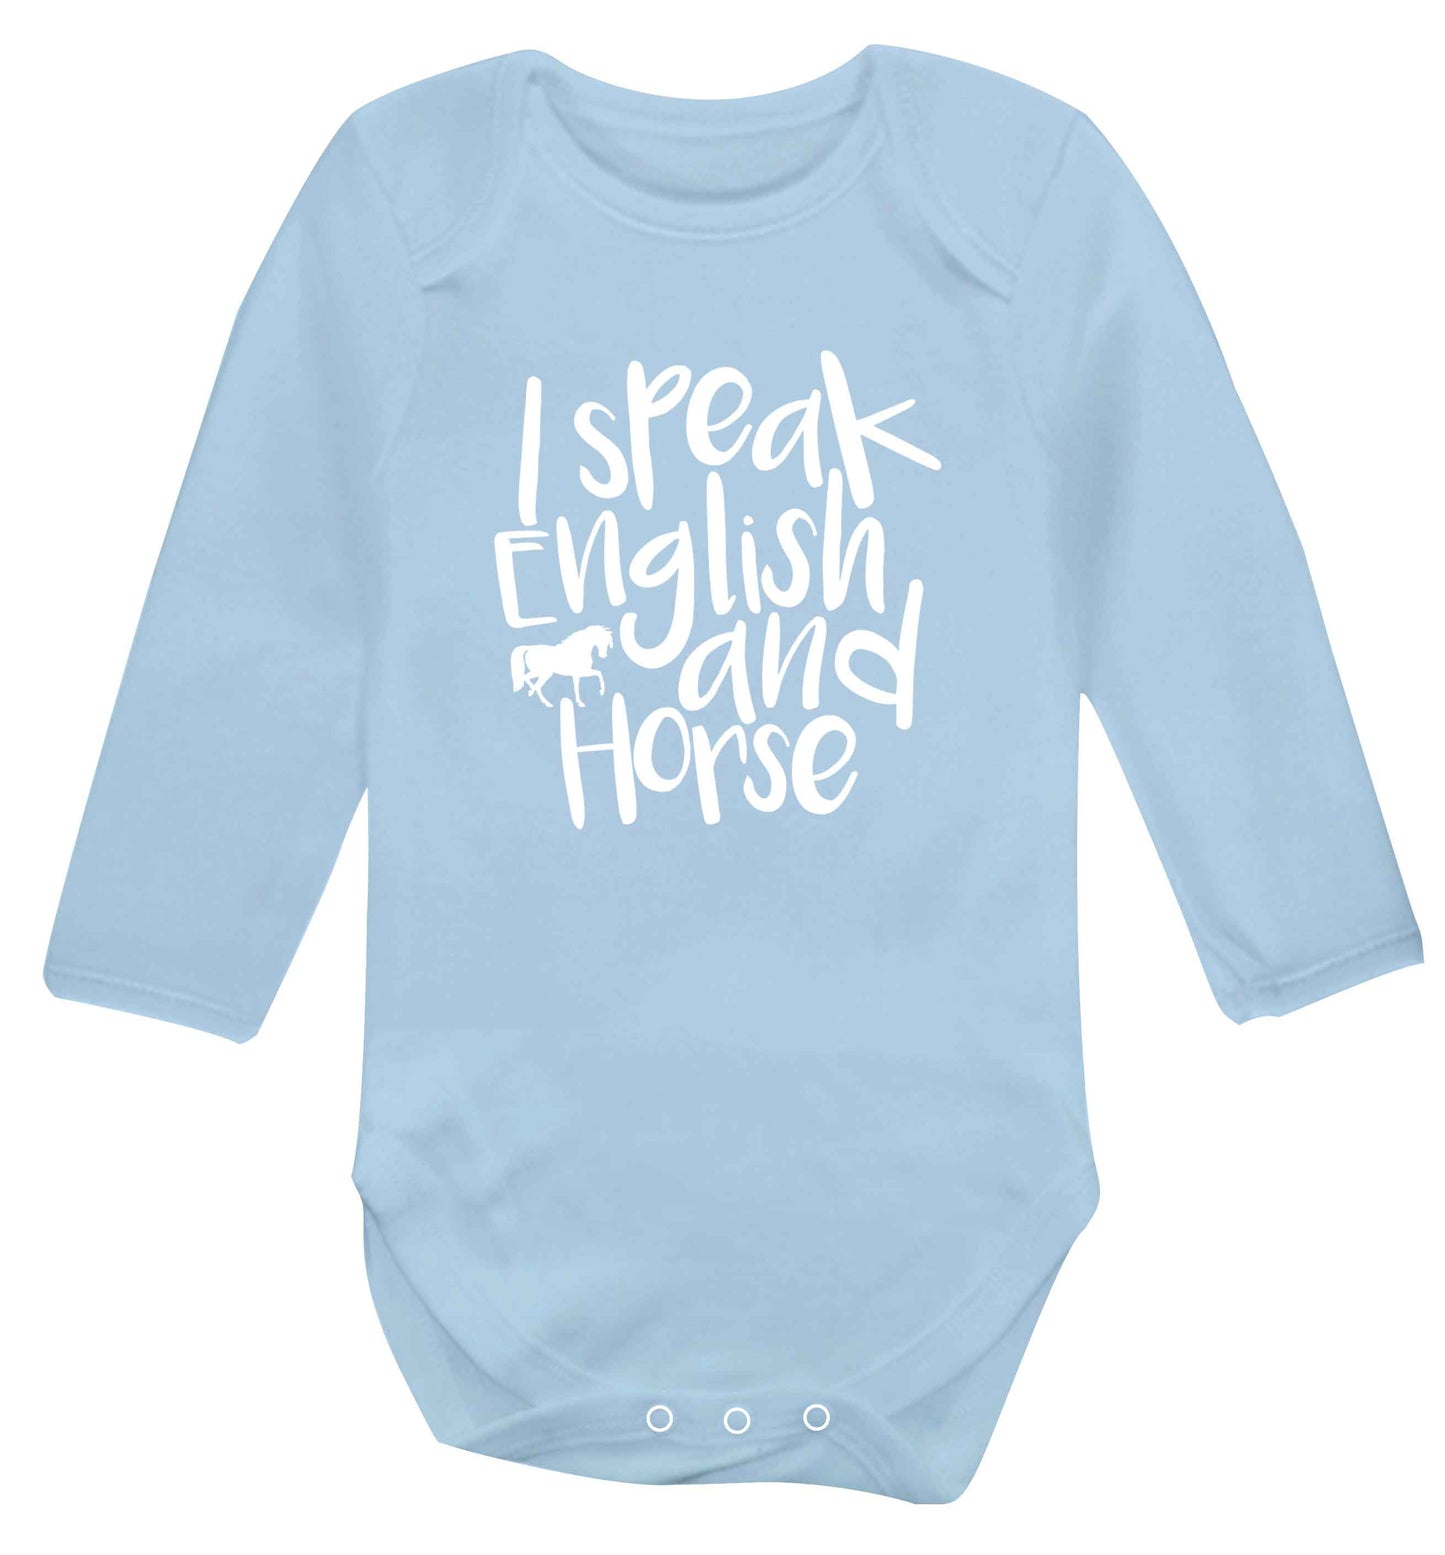 I speak English and horse baby vest long sleeved pale blue 6-12 months